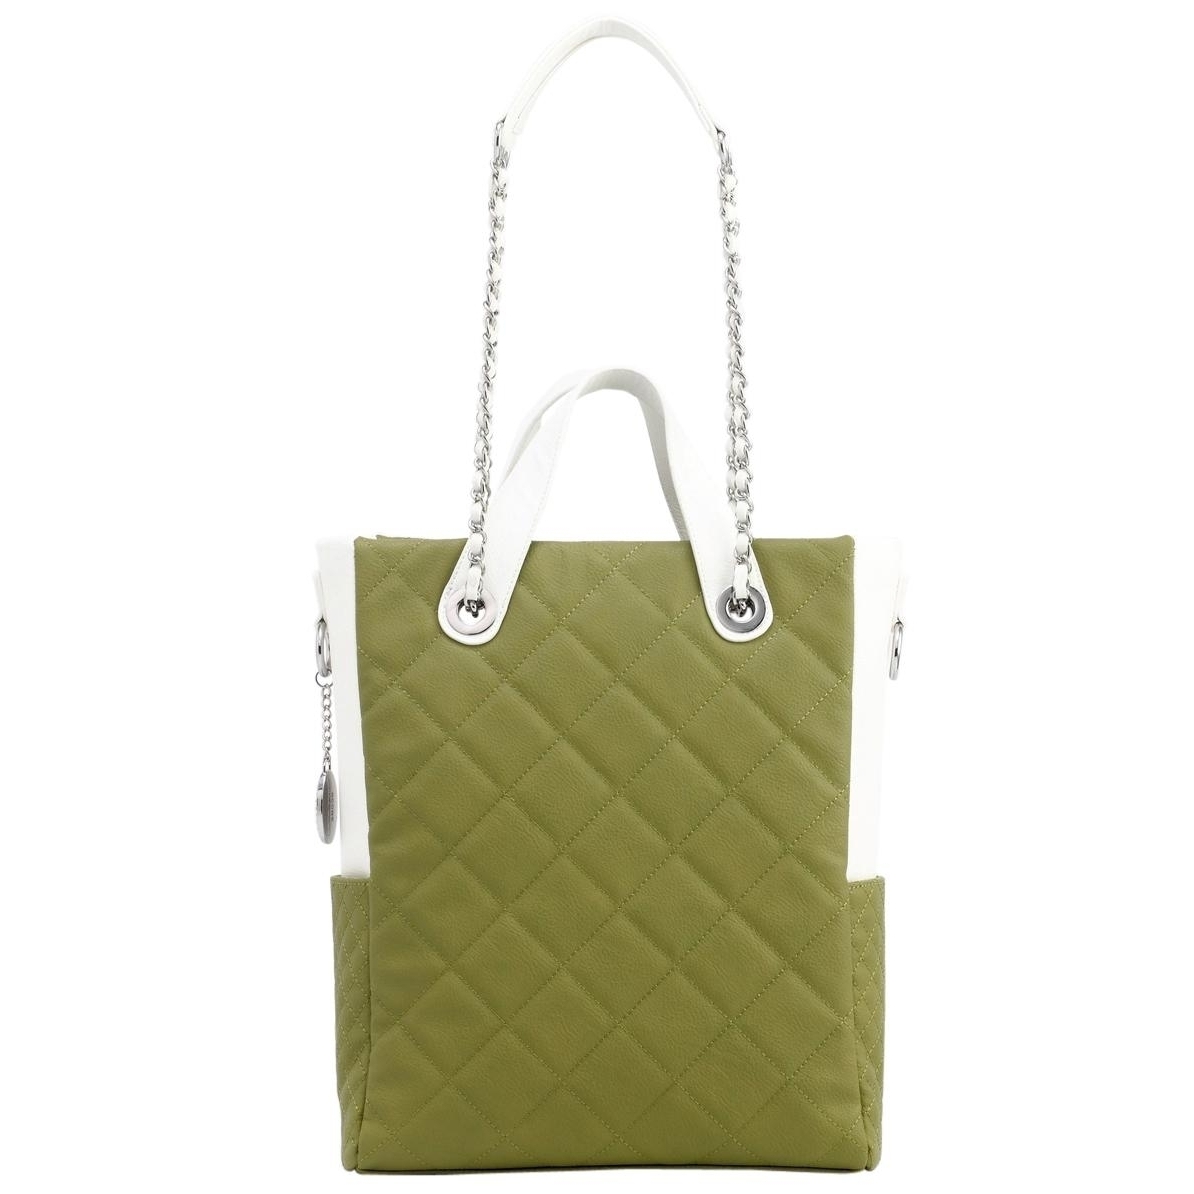 SCORE!'s Kat Travel Tote For Business, Work, Or School Quilted Shoulder Bag - Olive Green And White